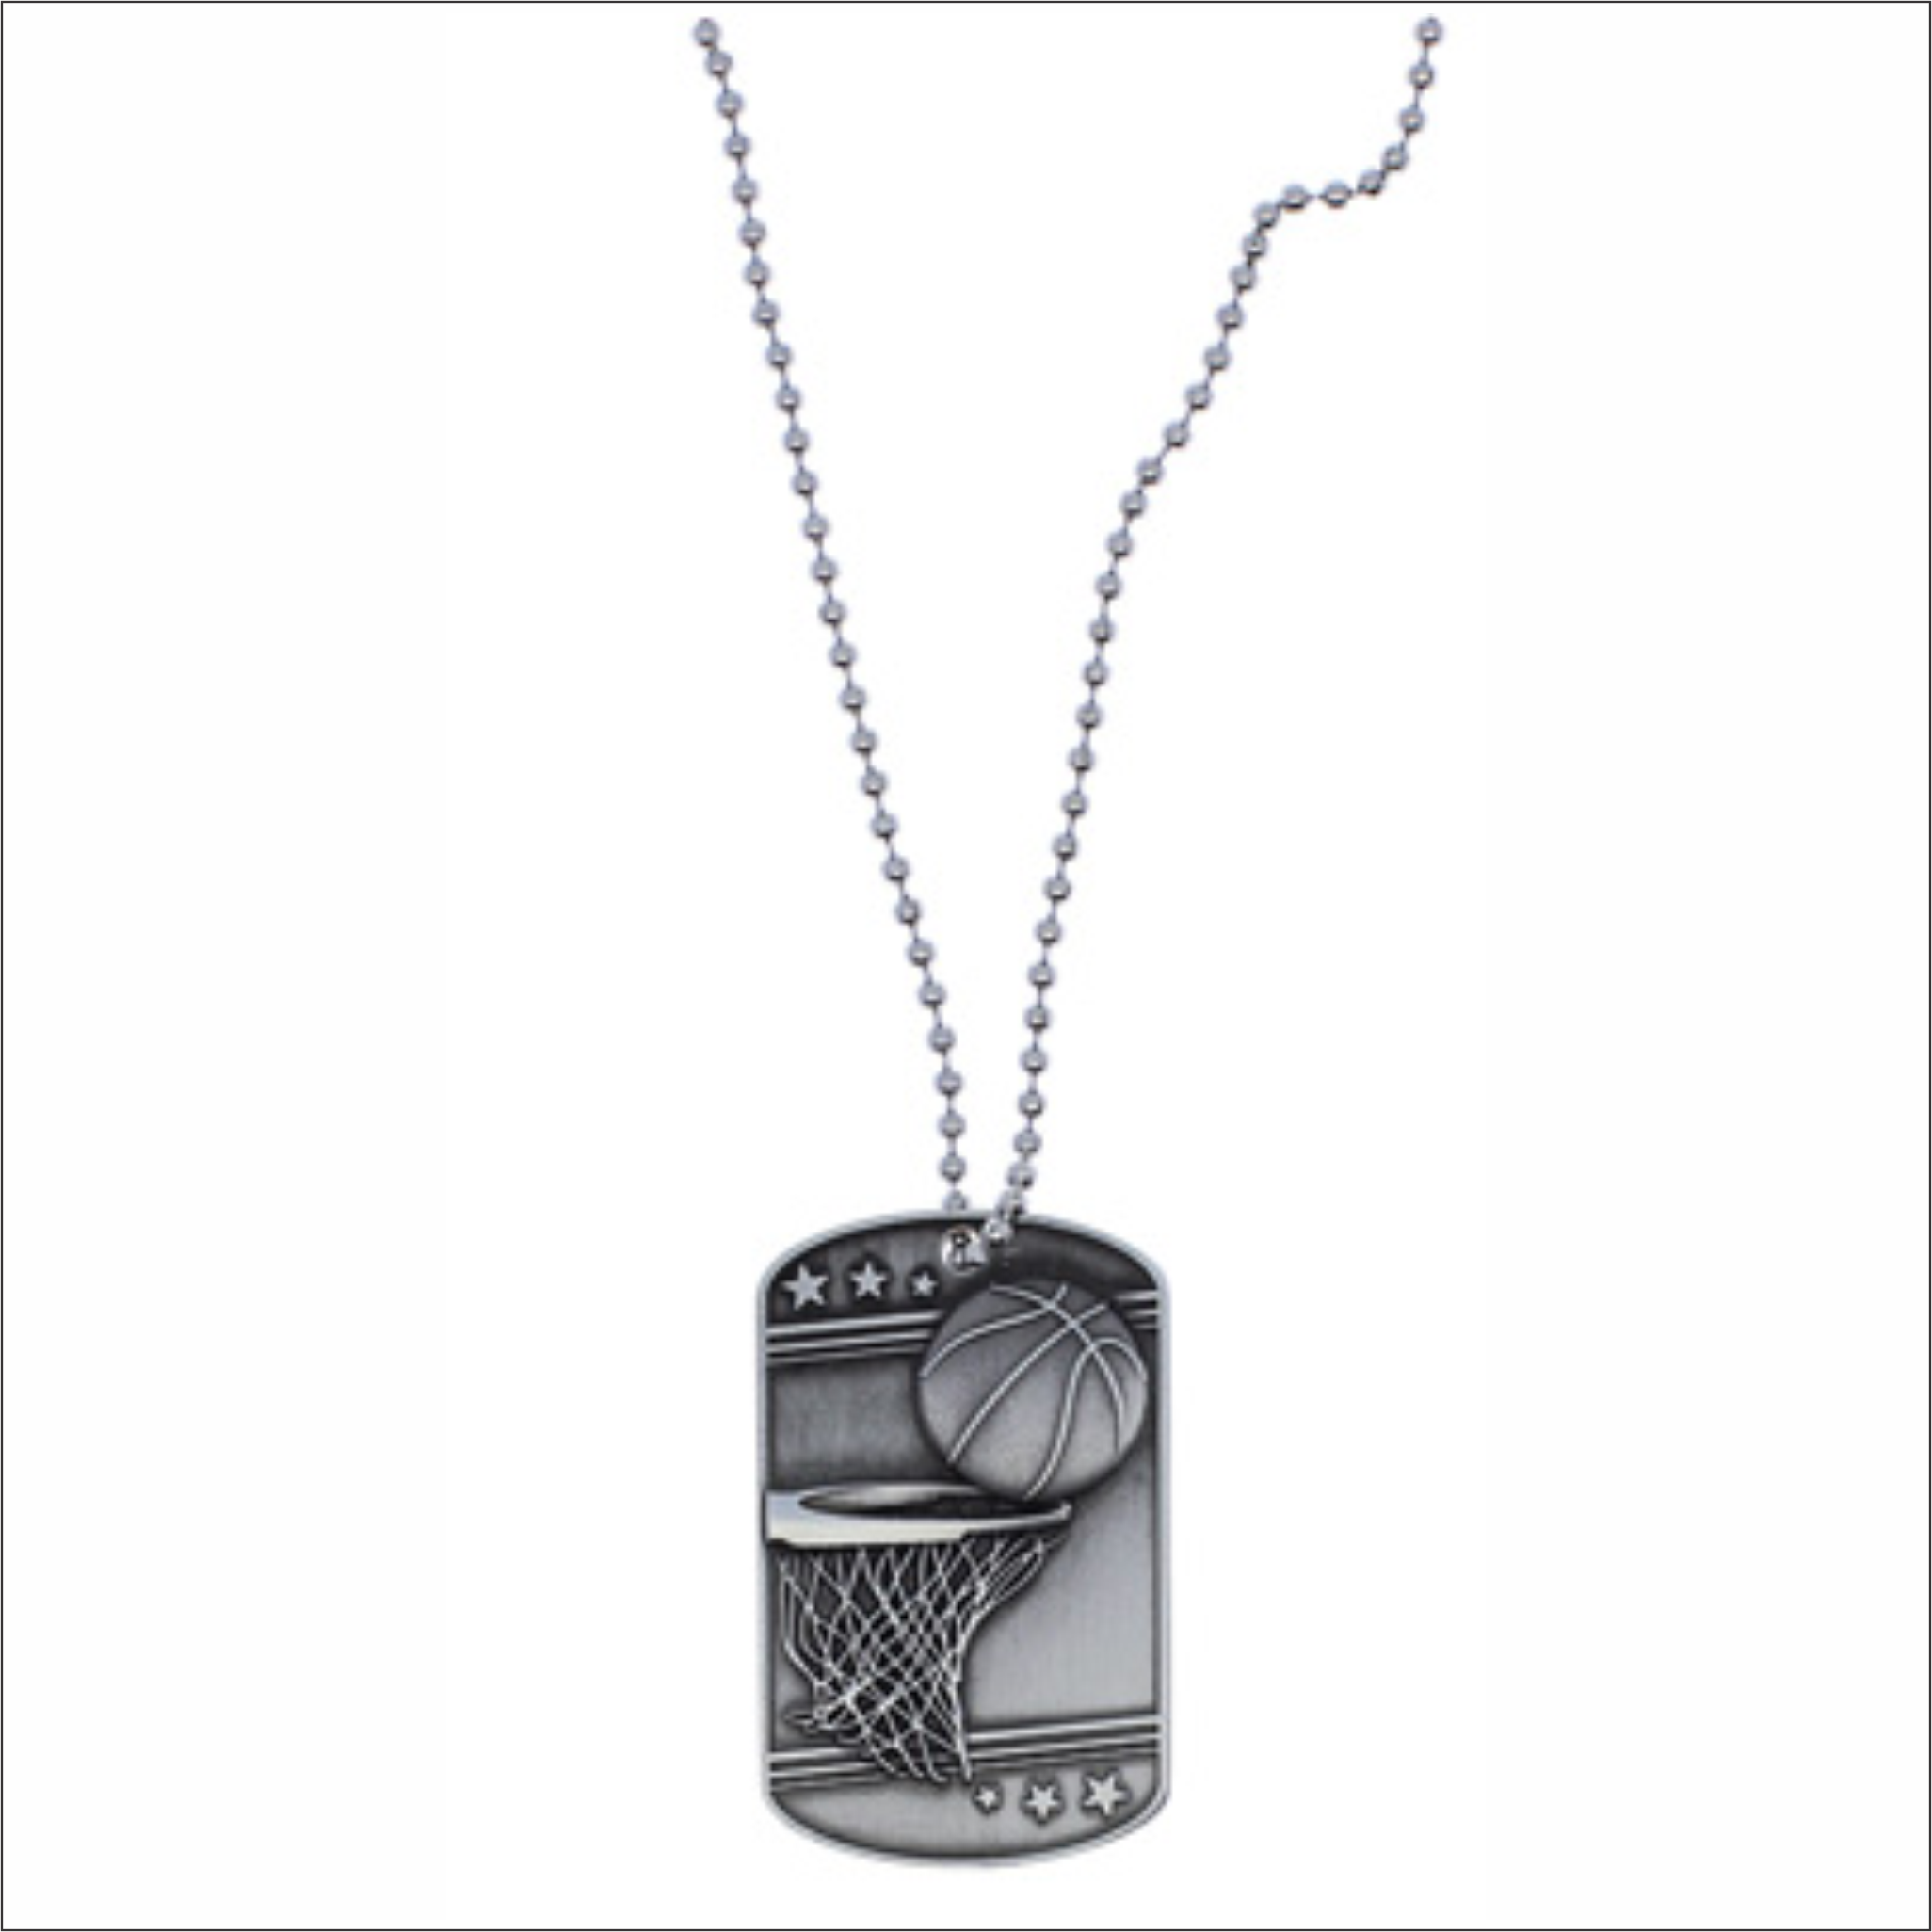 Sport Medals - Basketball - Dog Tags series MDT2103 MZP303